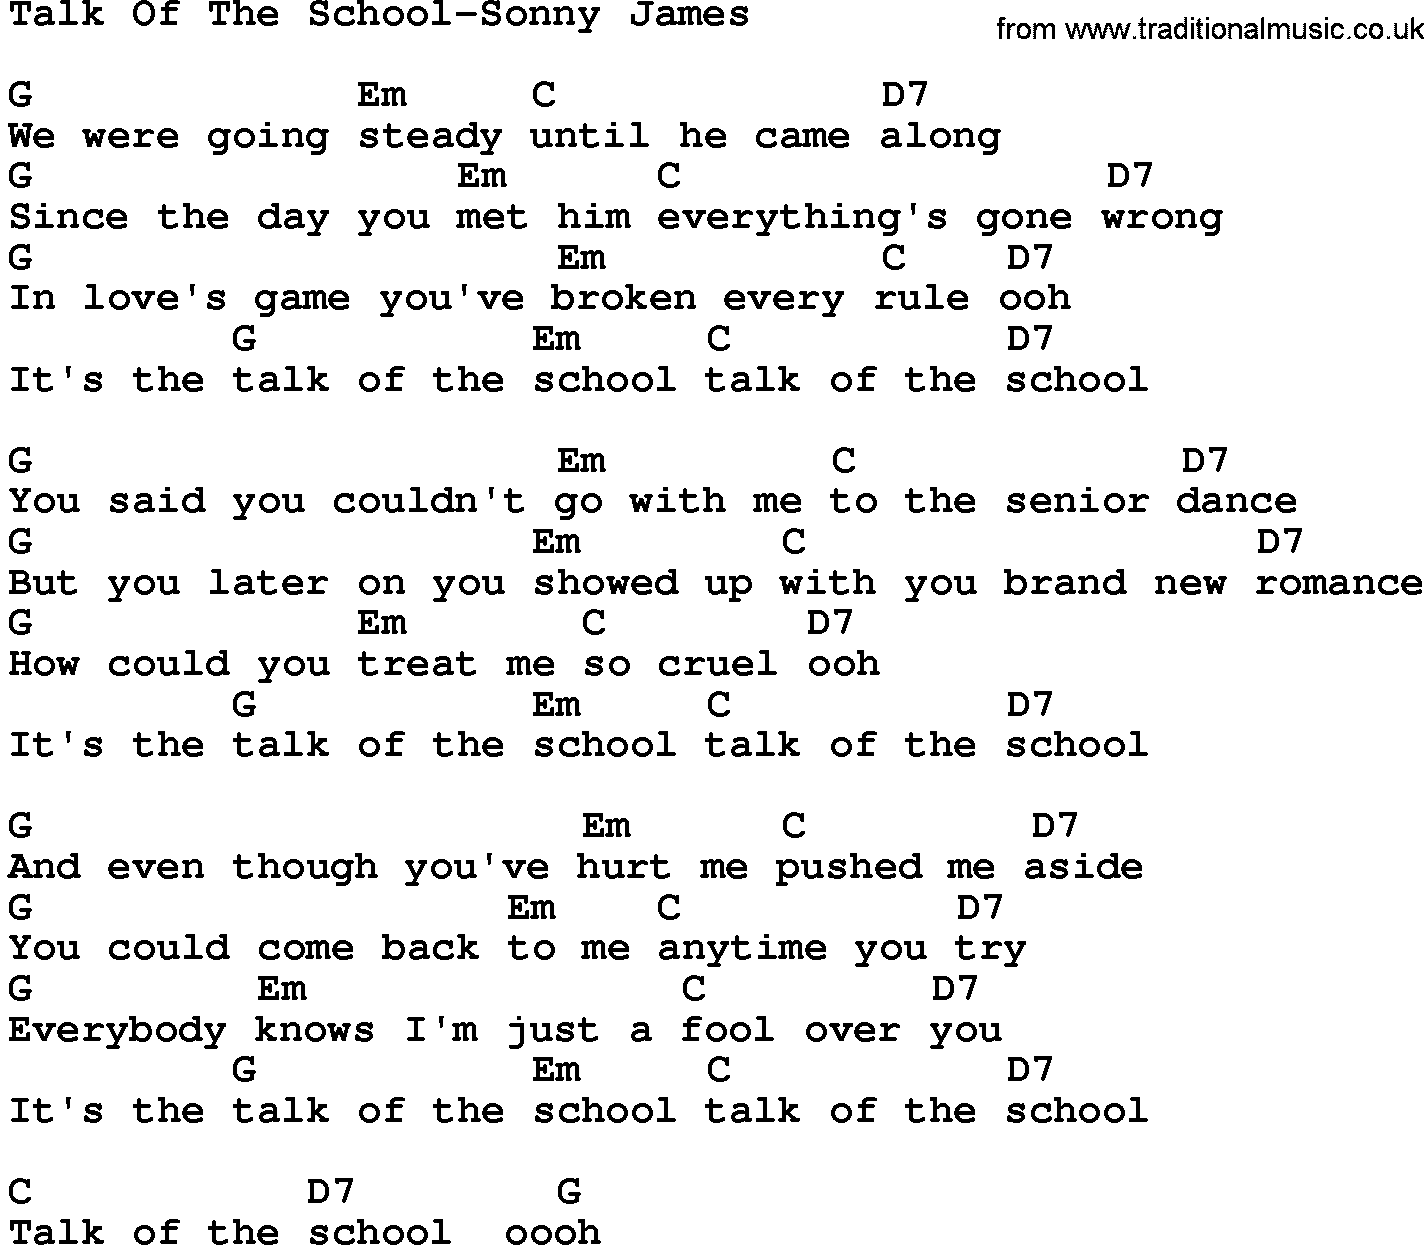 Country music song: Talk Of The School-Sonny James lyrics and chords